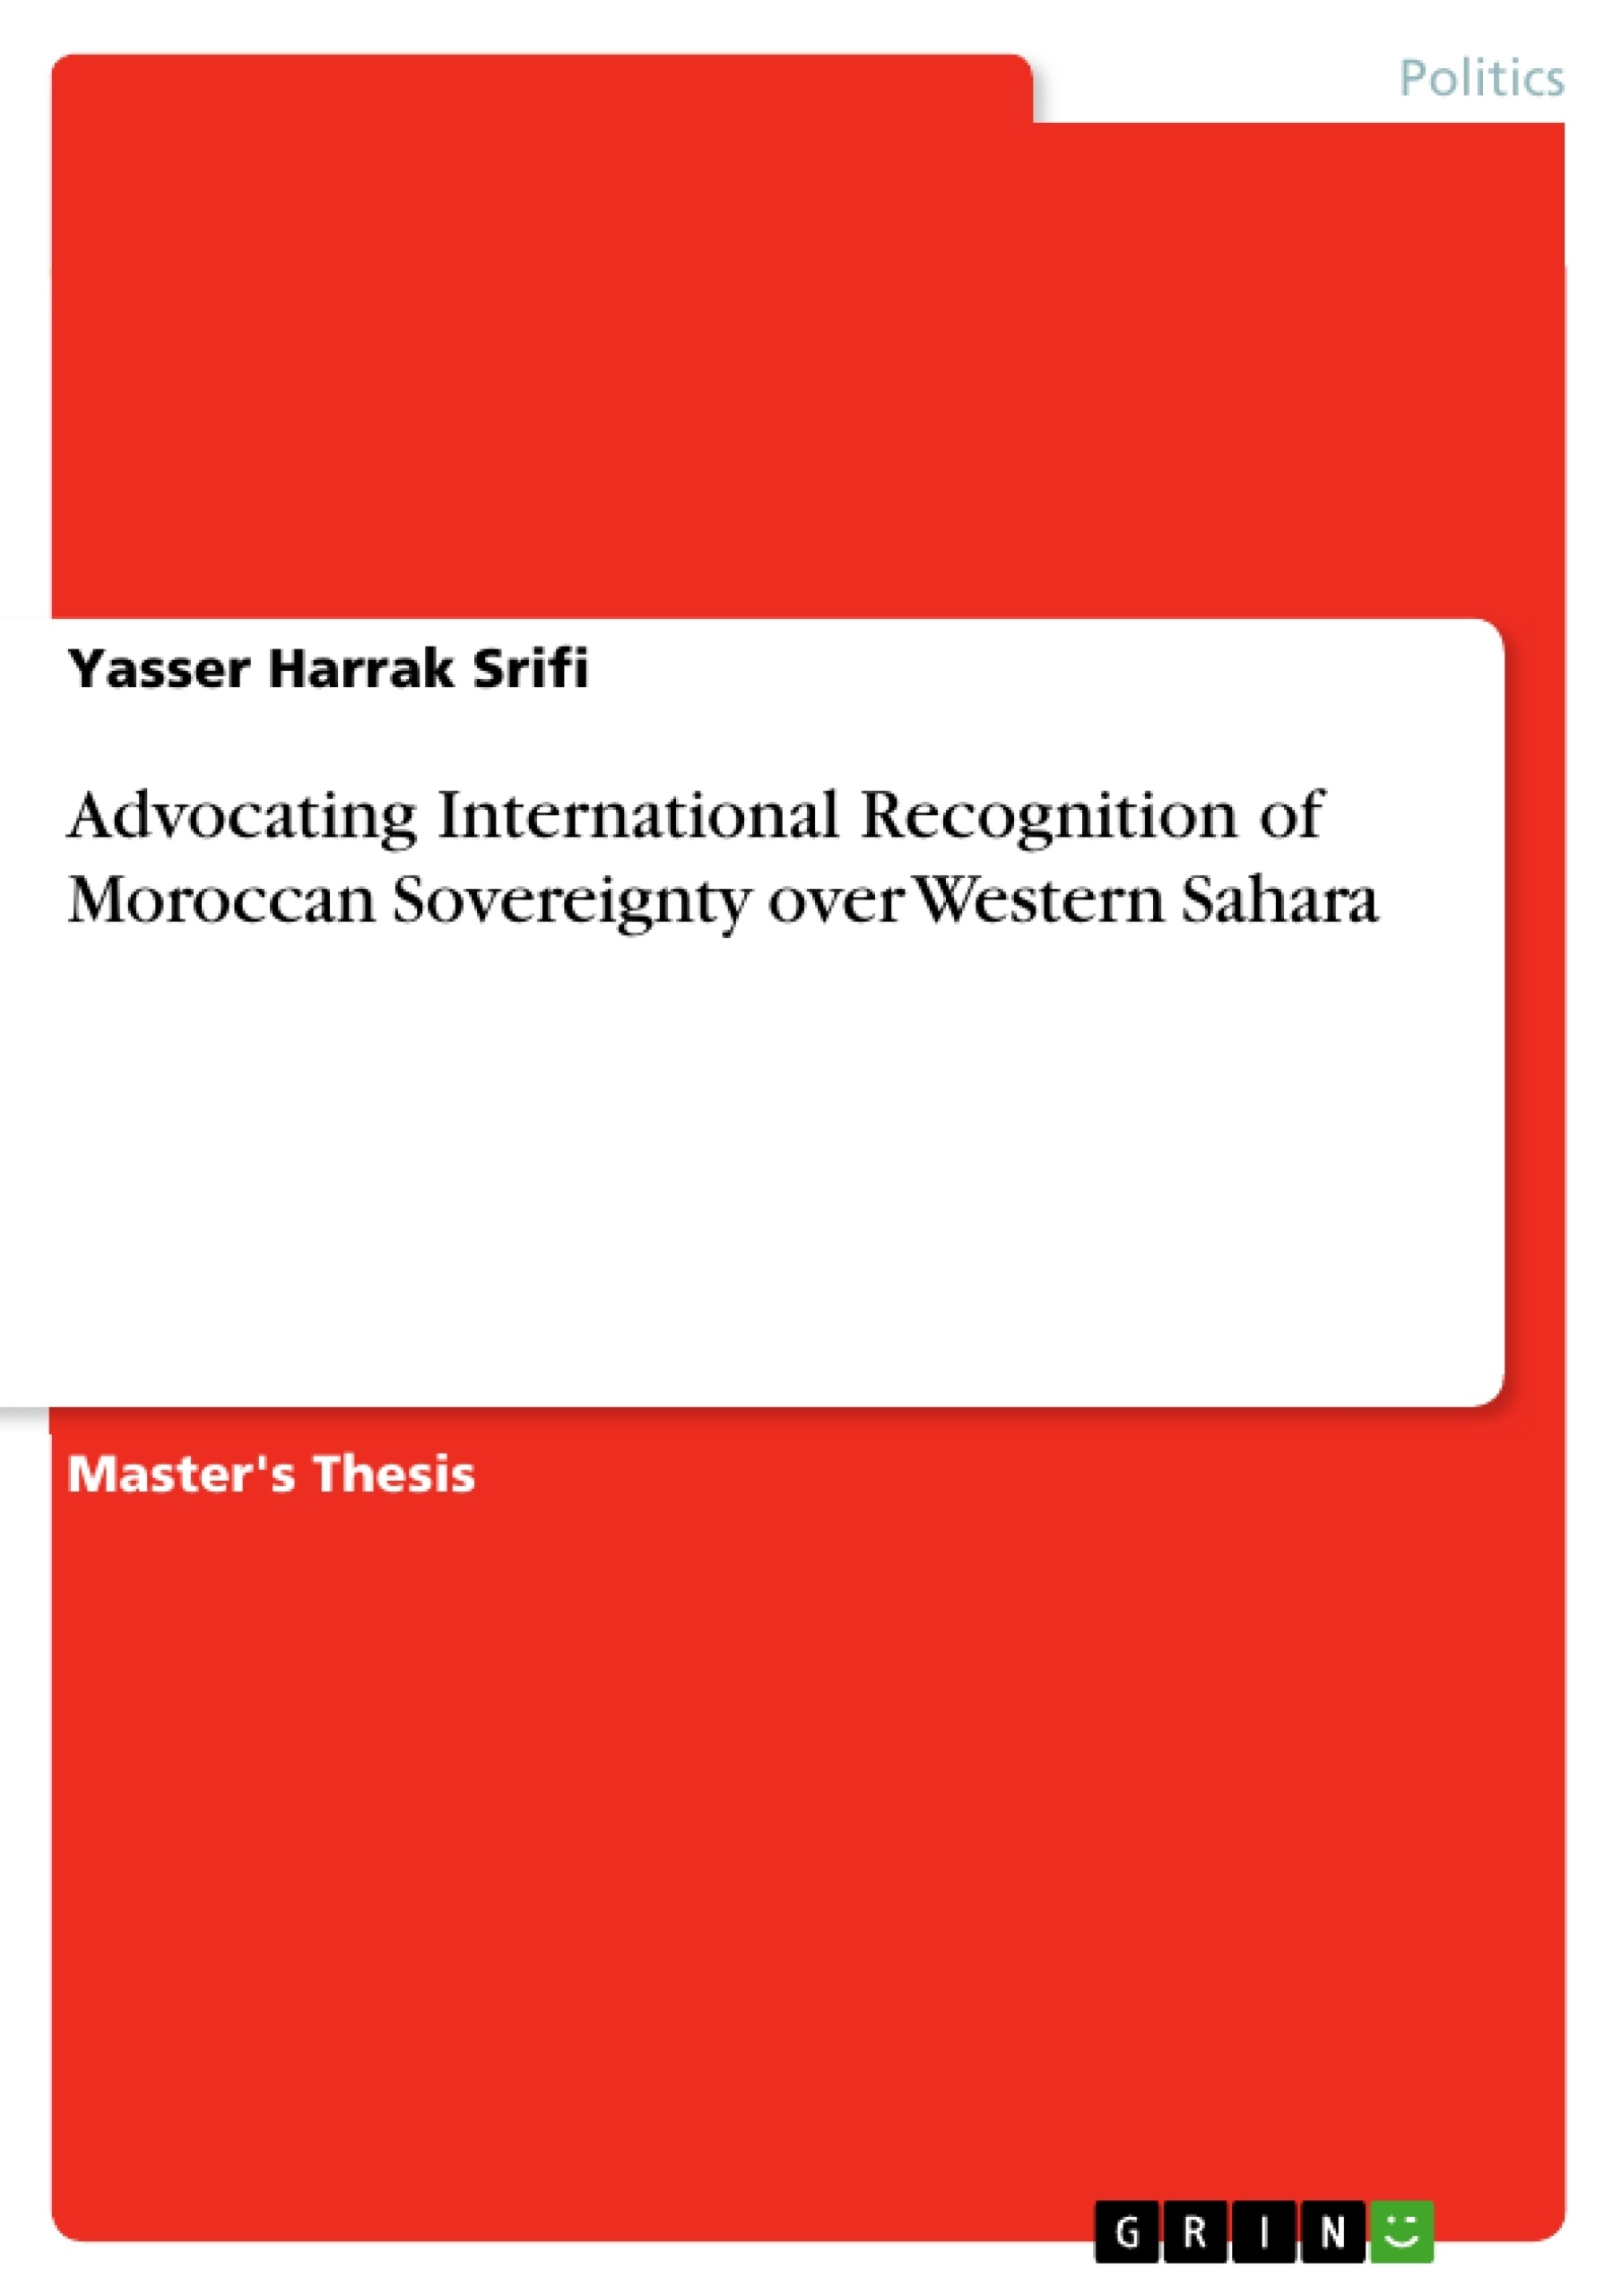 Title: Advocating International Recognition of Moroccan Sovereignty over Western Sahara